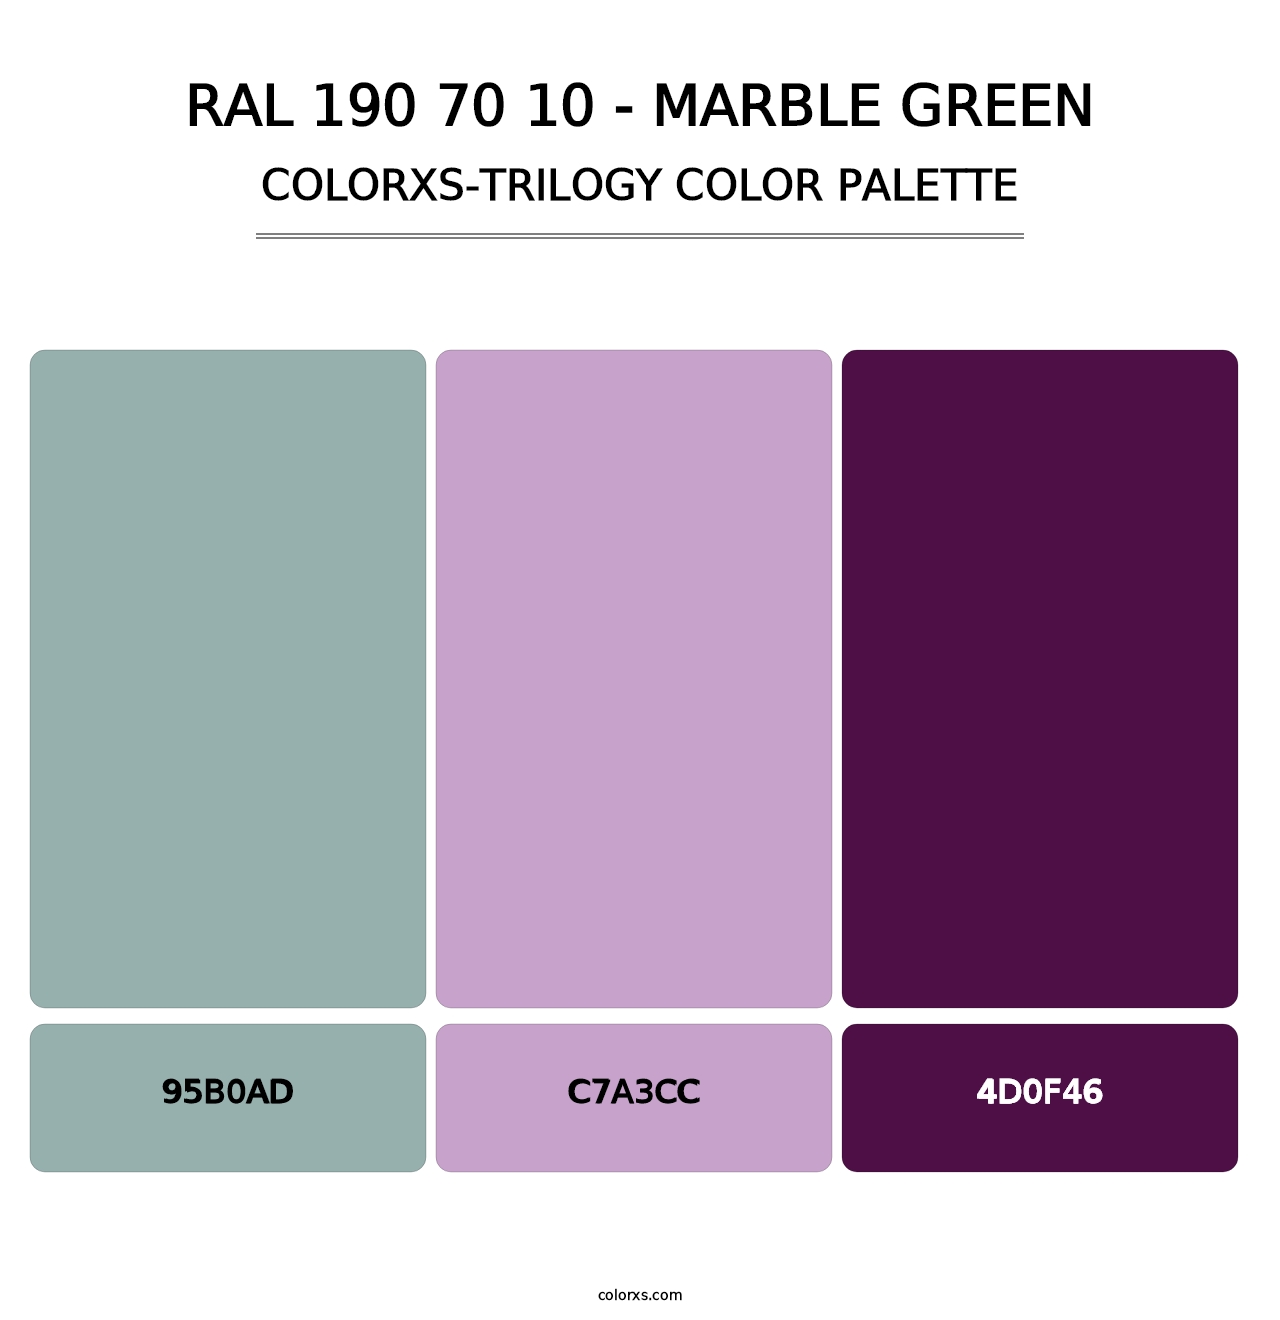 RAL 190 70 10 - Marble Green - Colorxs Trilogy Palette